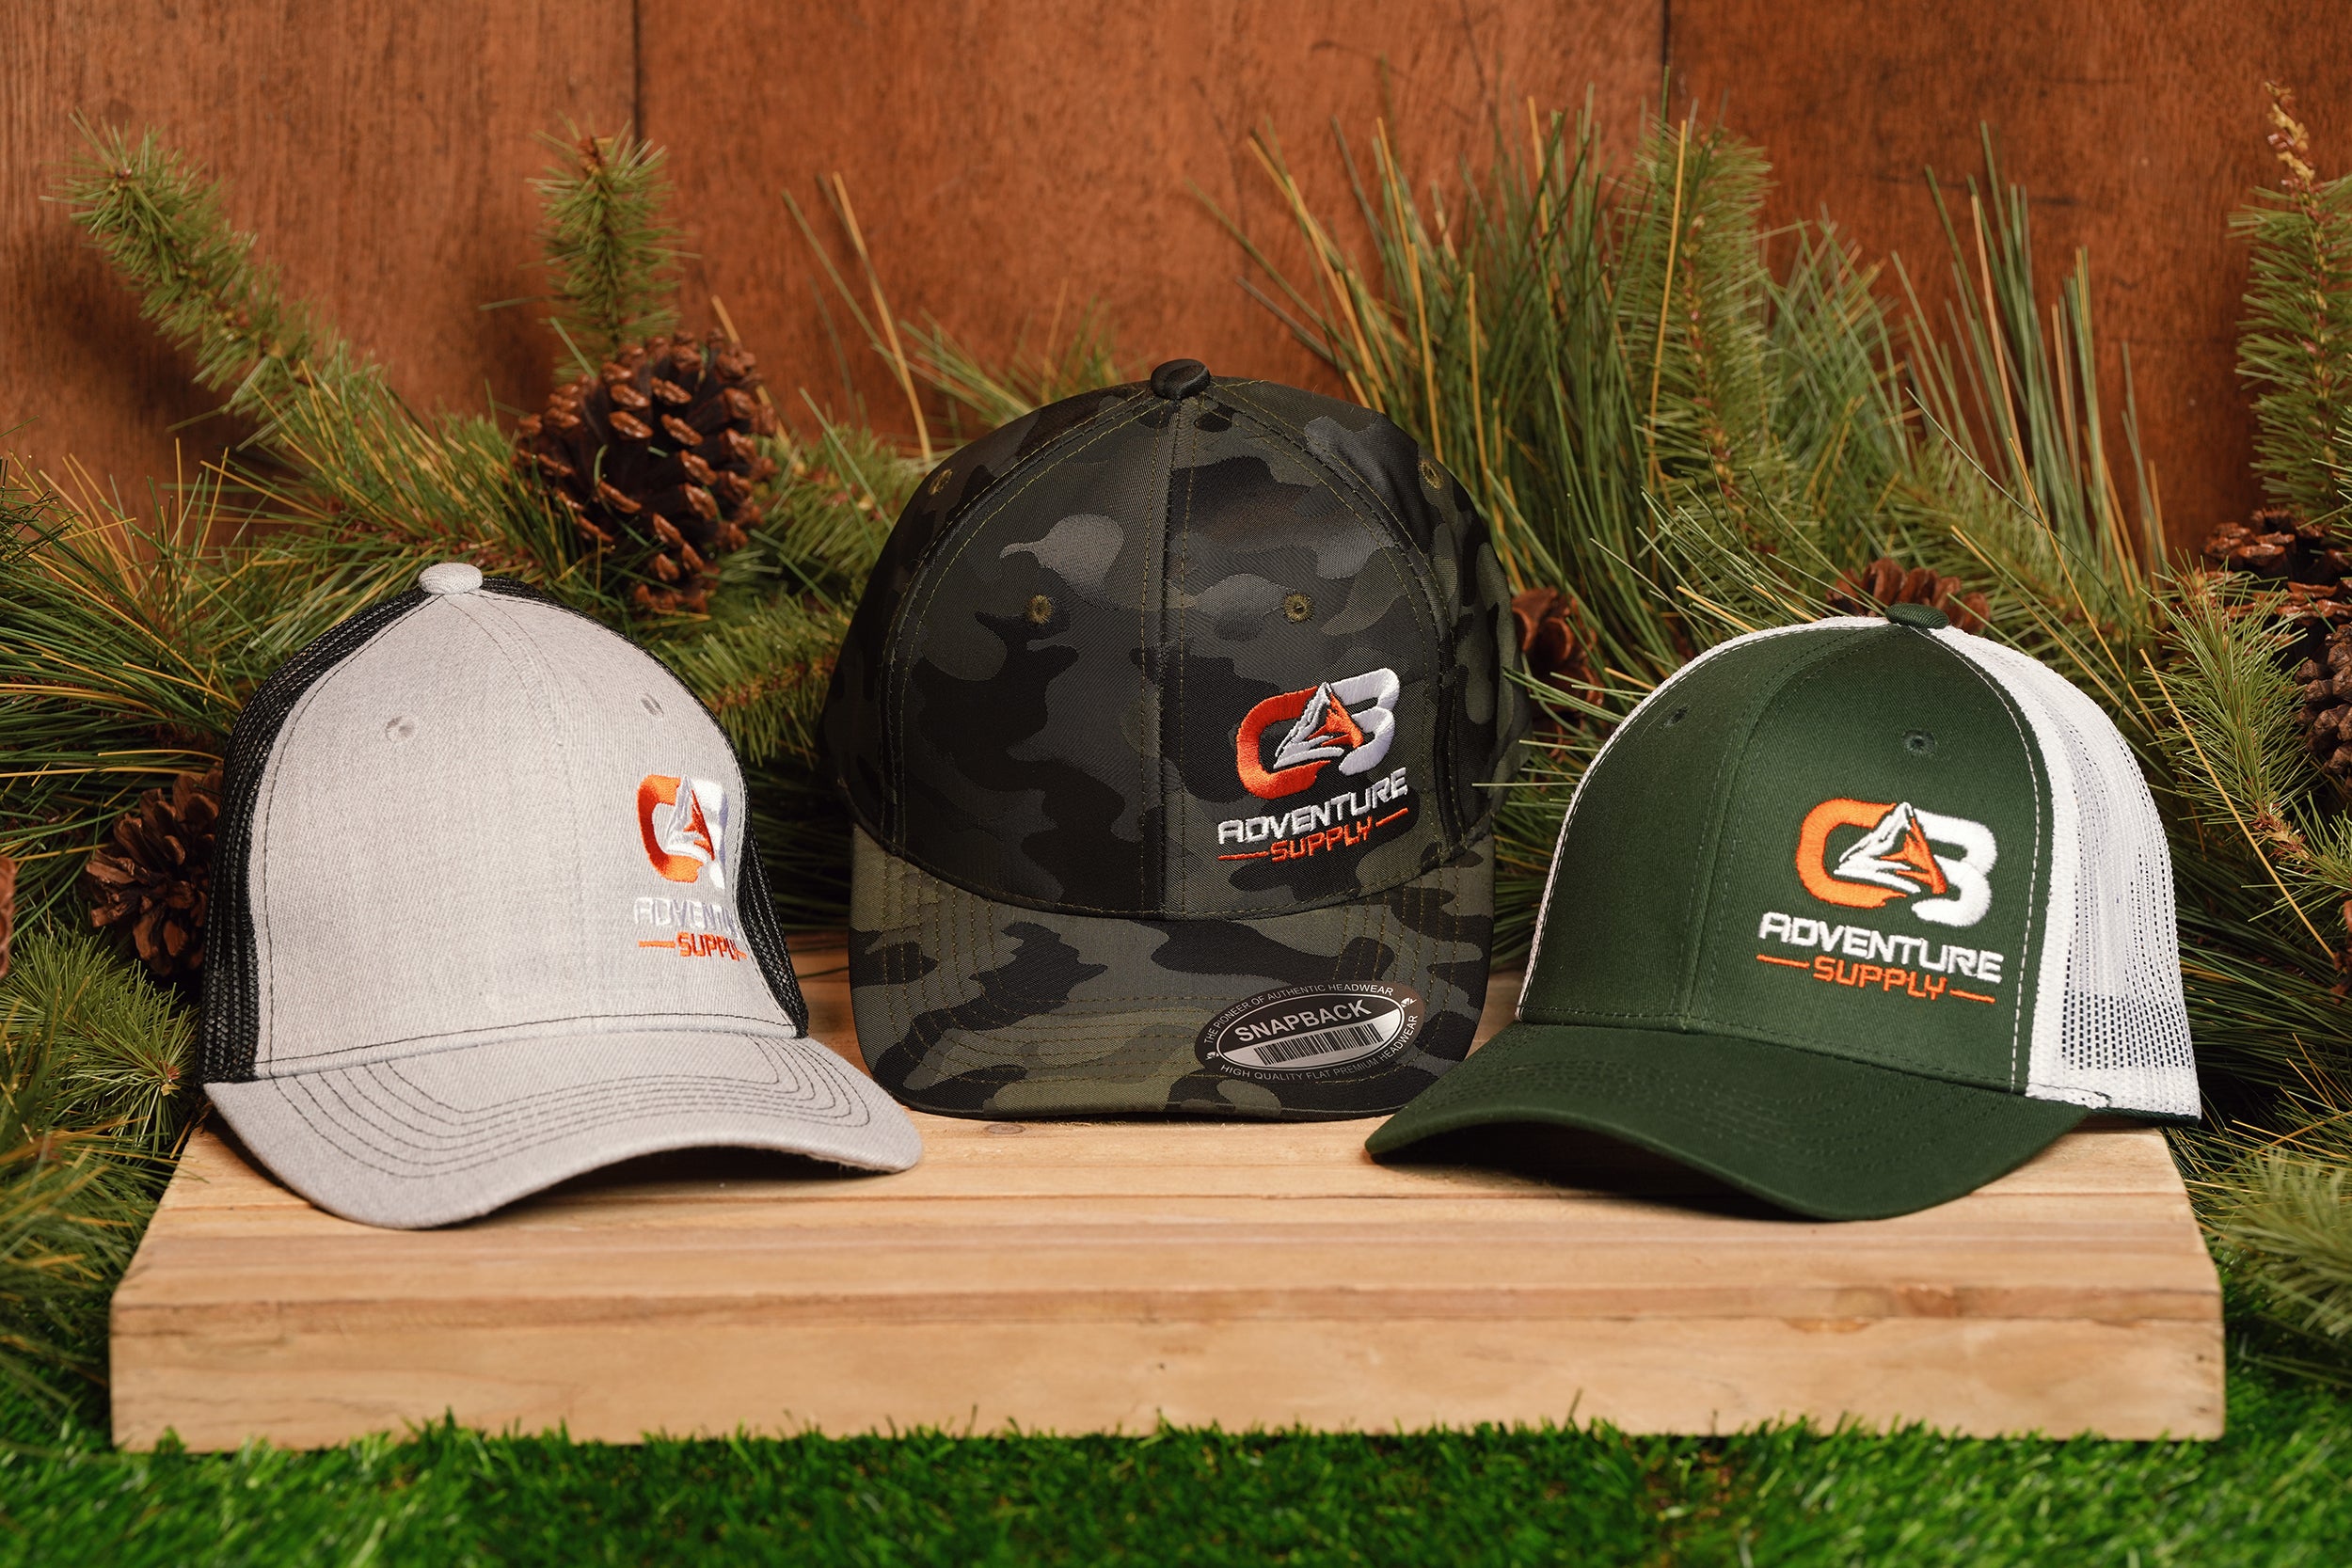 New CB Adventure Supply Hat - Black and Gray